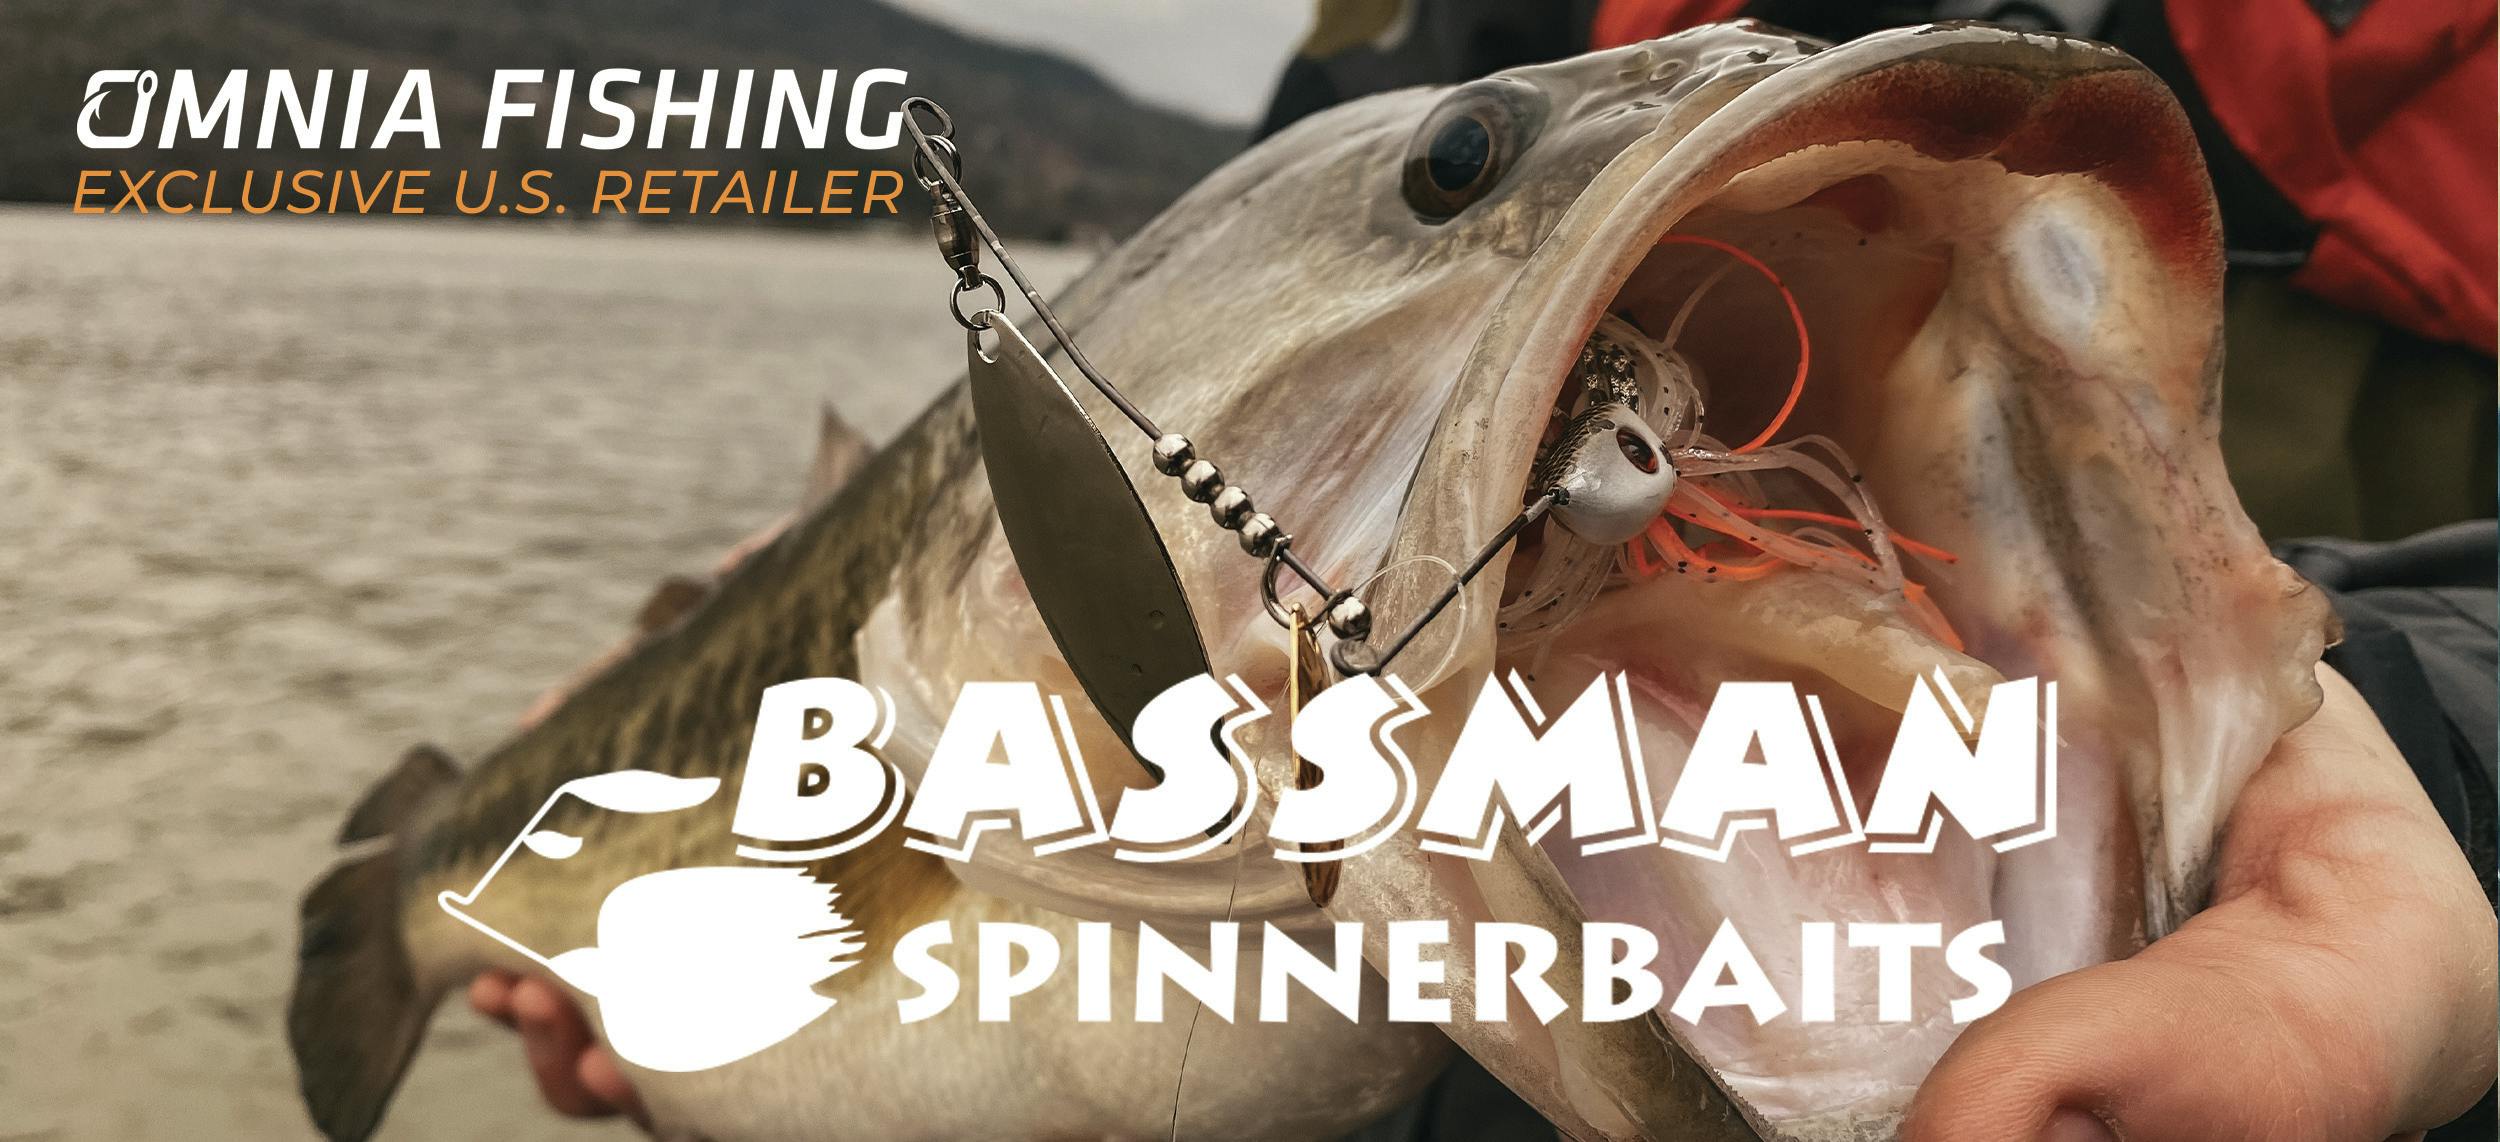 Omnia Fishing Become Exclusive US Retailer for Bassman Spinnerbaits